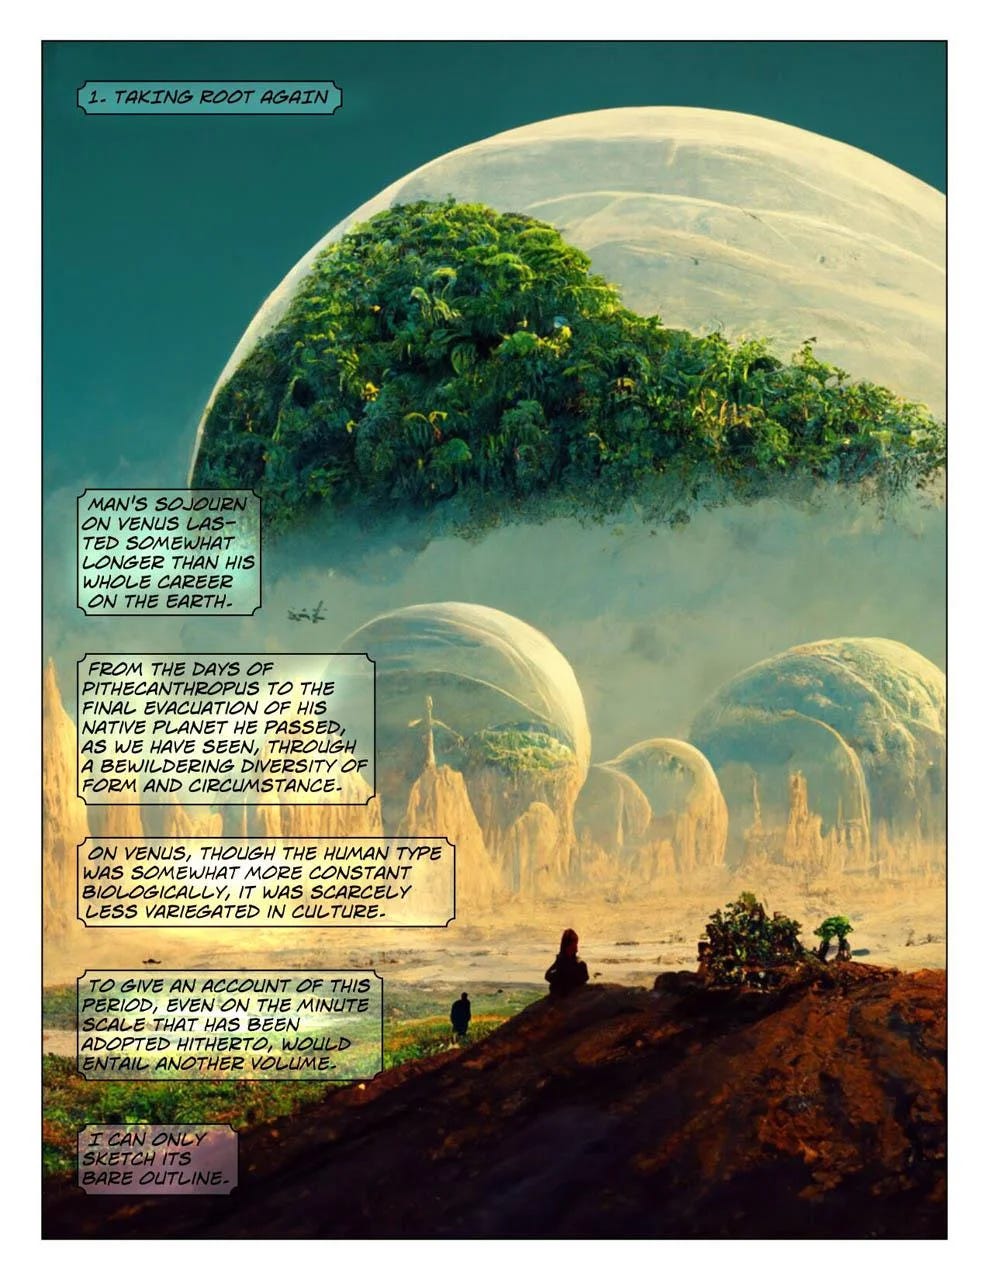 r/sciencefiction - Olaf Stapledon's Last and First Men: The Visual Edition (Illustrated) - 825 page graphic novel adaptation of the novel (AMA)